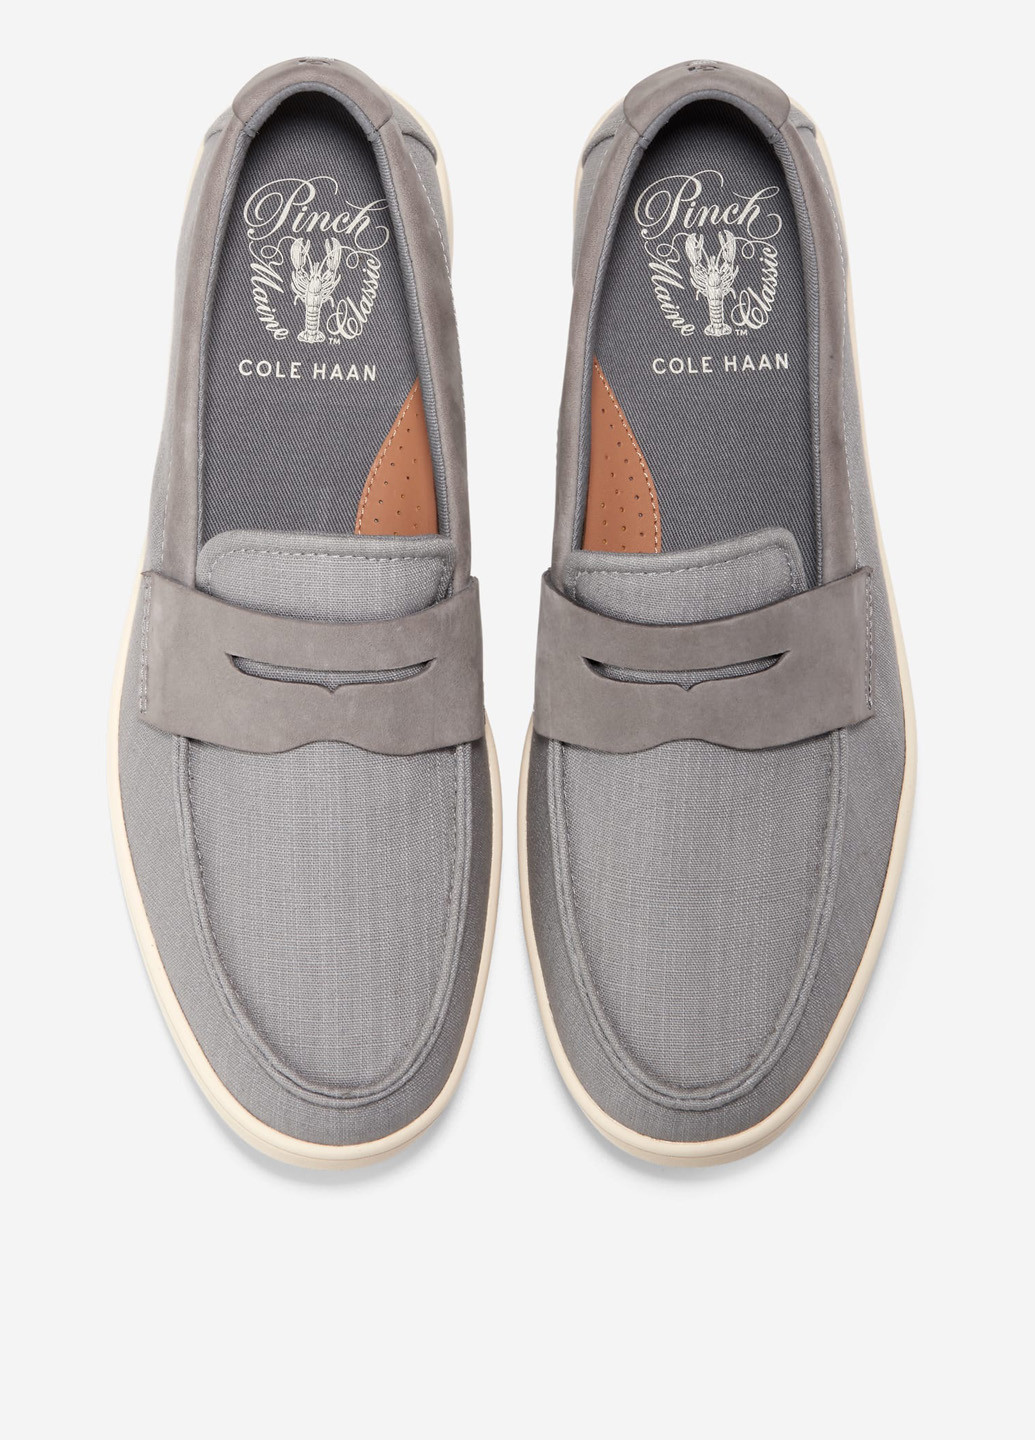 Туфлі s Cole Haan pinch weekender txt penny loafer (282962624)